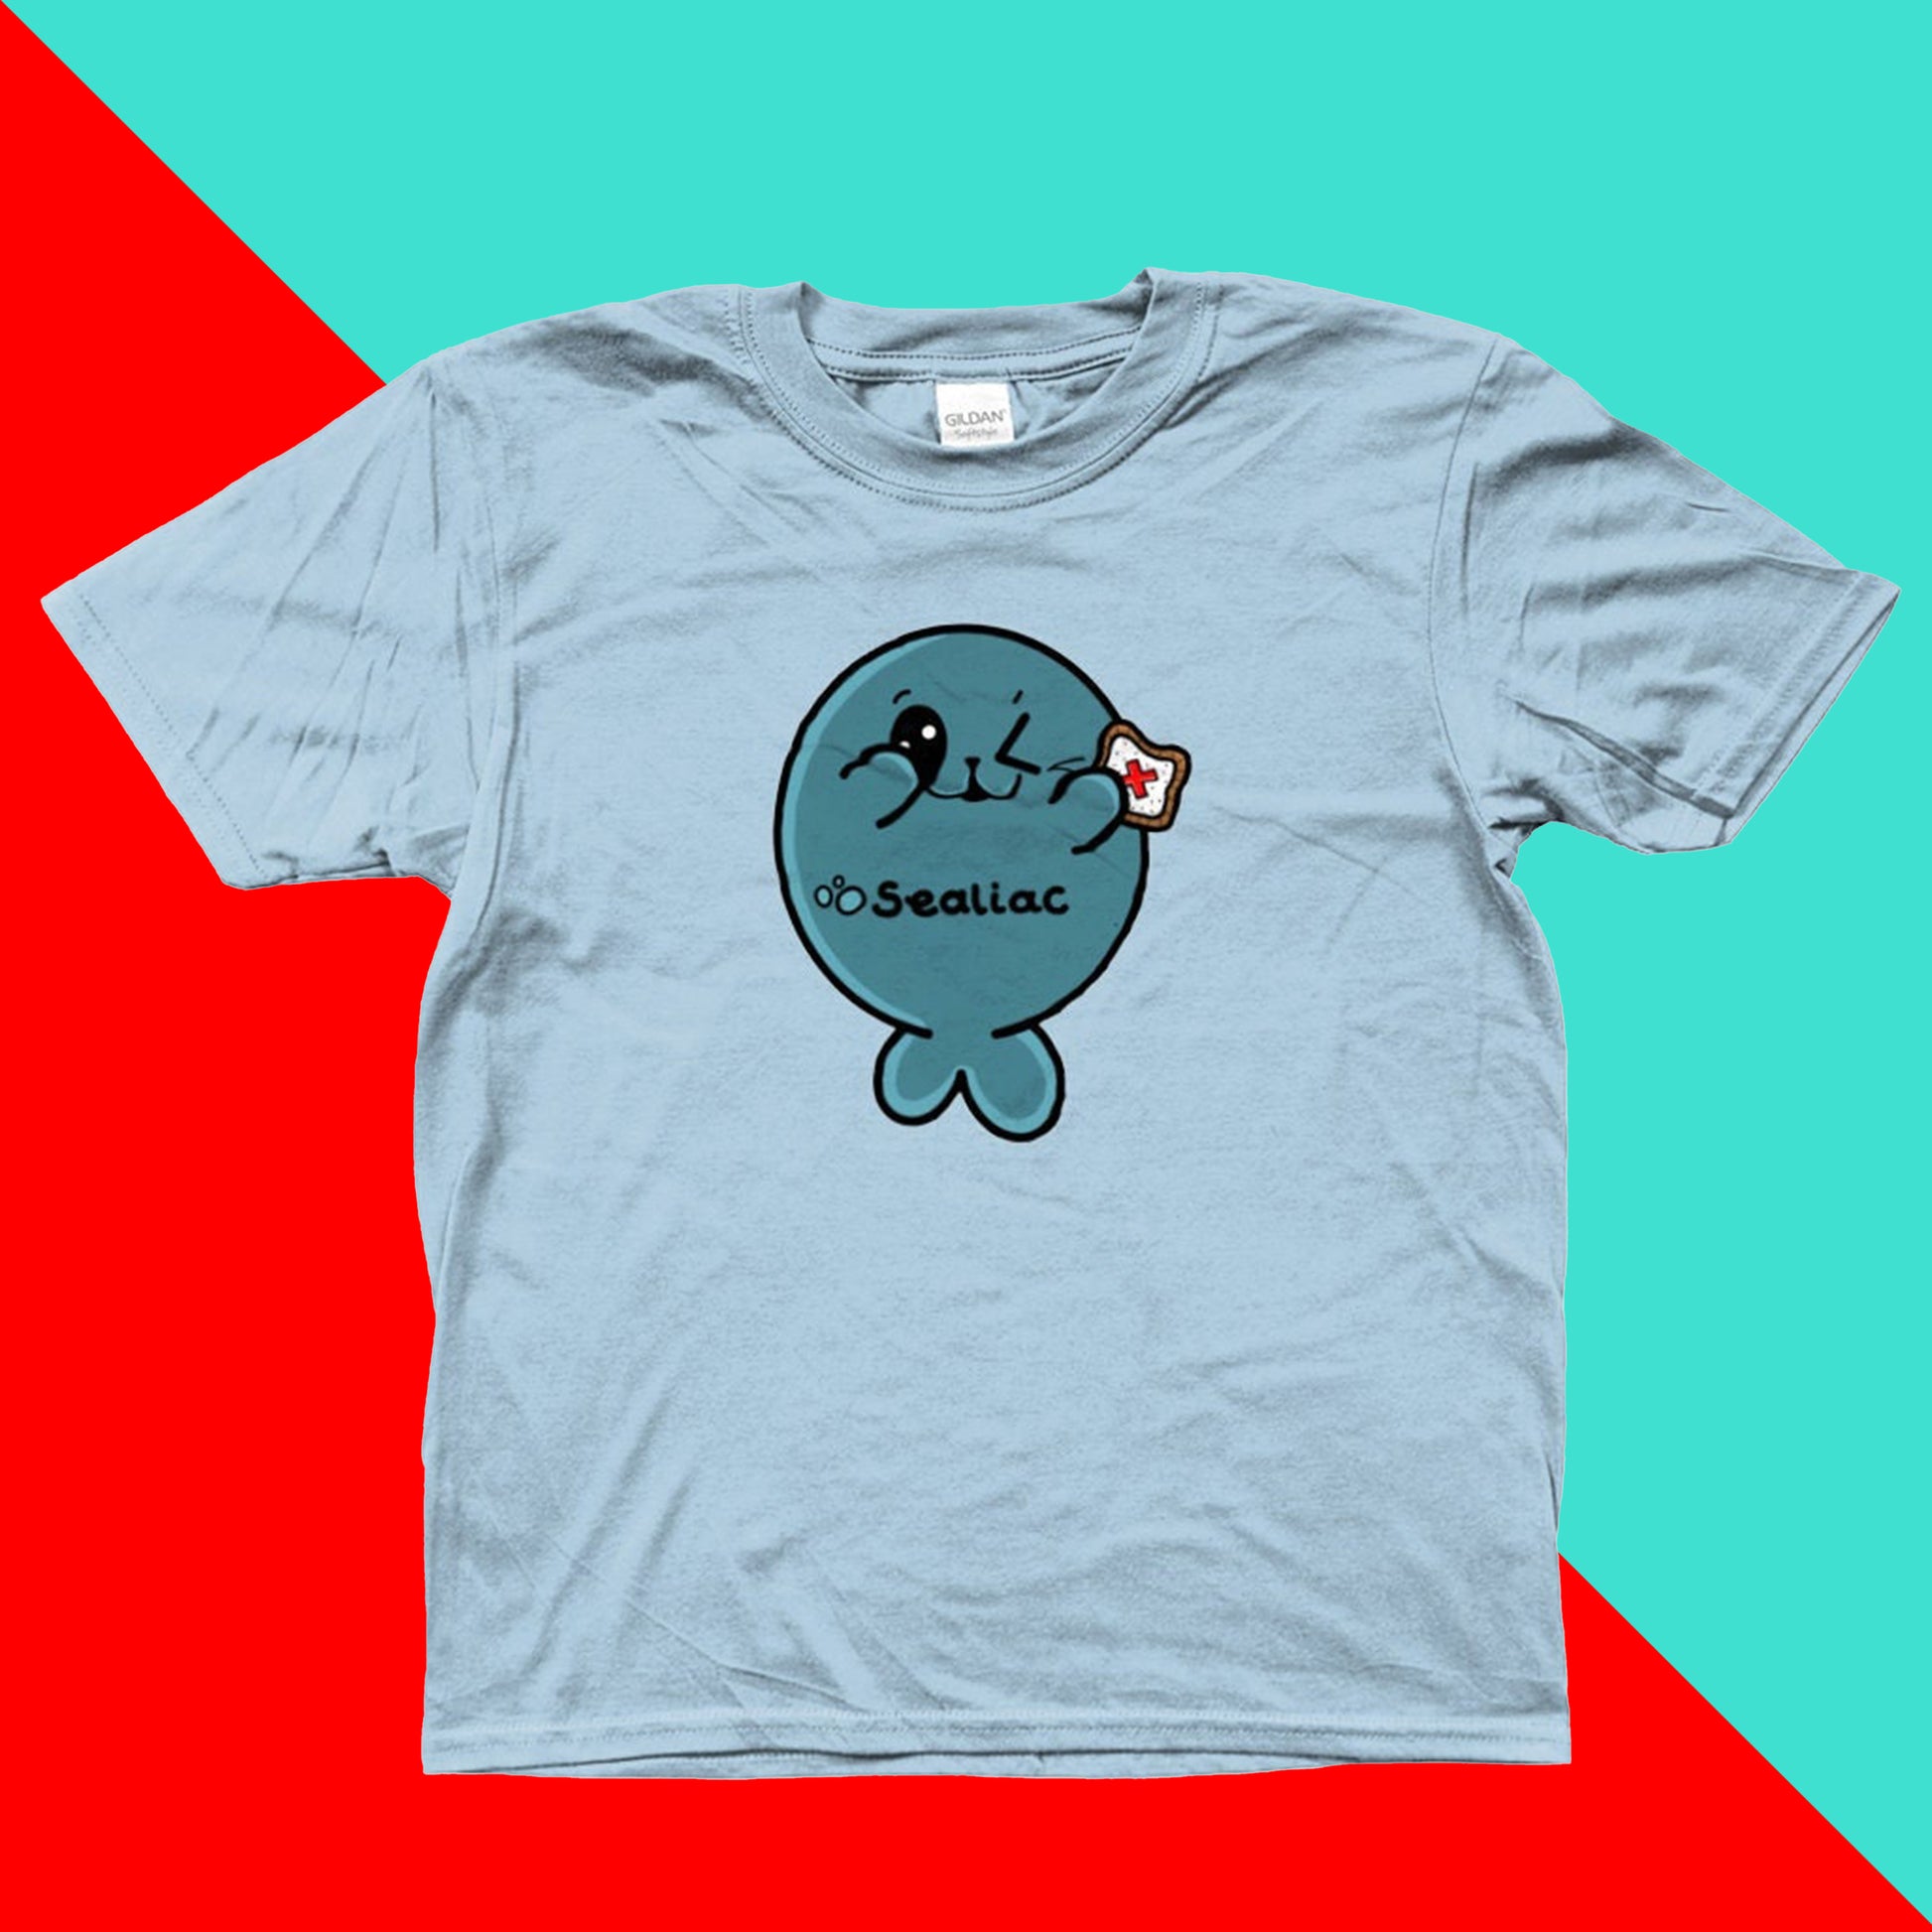 The Sealiac Coeliac Kids Tee - Coeliac on a red and blue background. The light blue short sleeve tshirt features a winking blue seal holding up a piece of toast with a red cross in the middle, across its belly in black reads 'Sealiac'. The hand drawn design is raising awareness for Coeliac and gluten allergy.